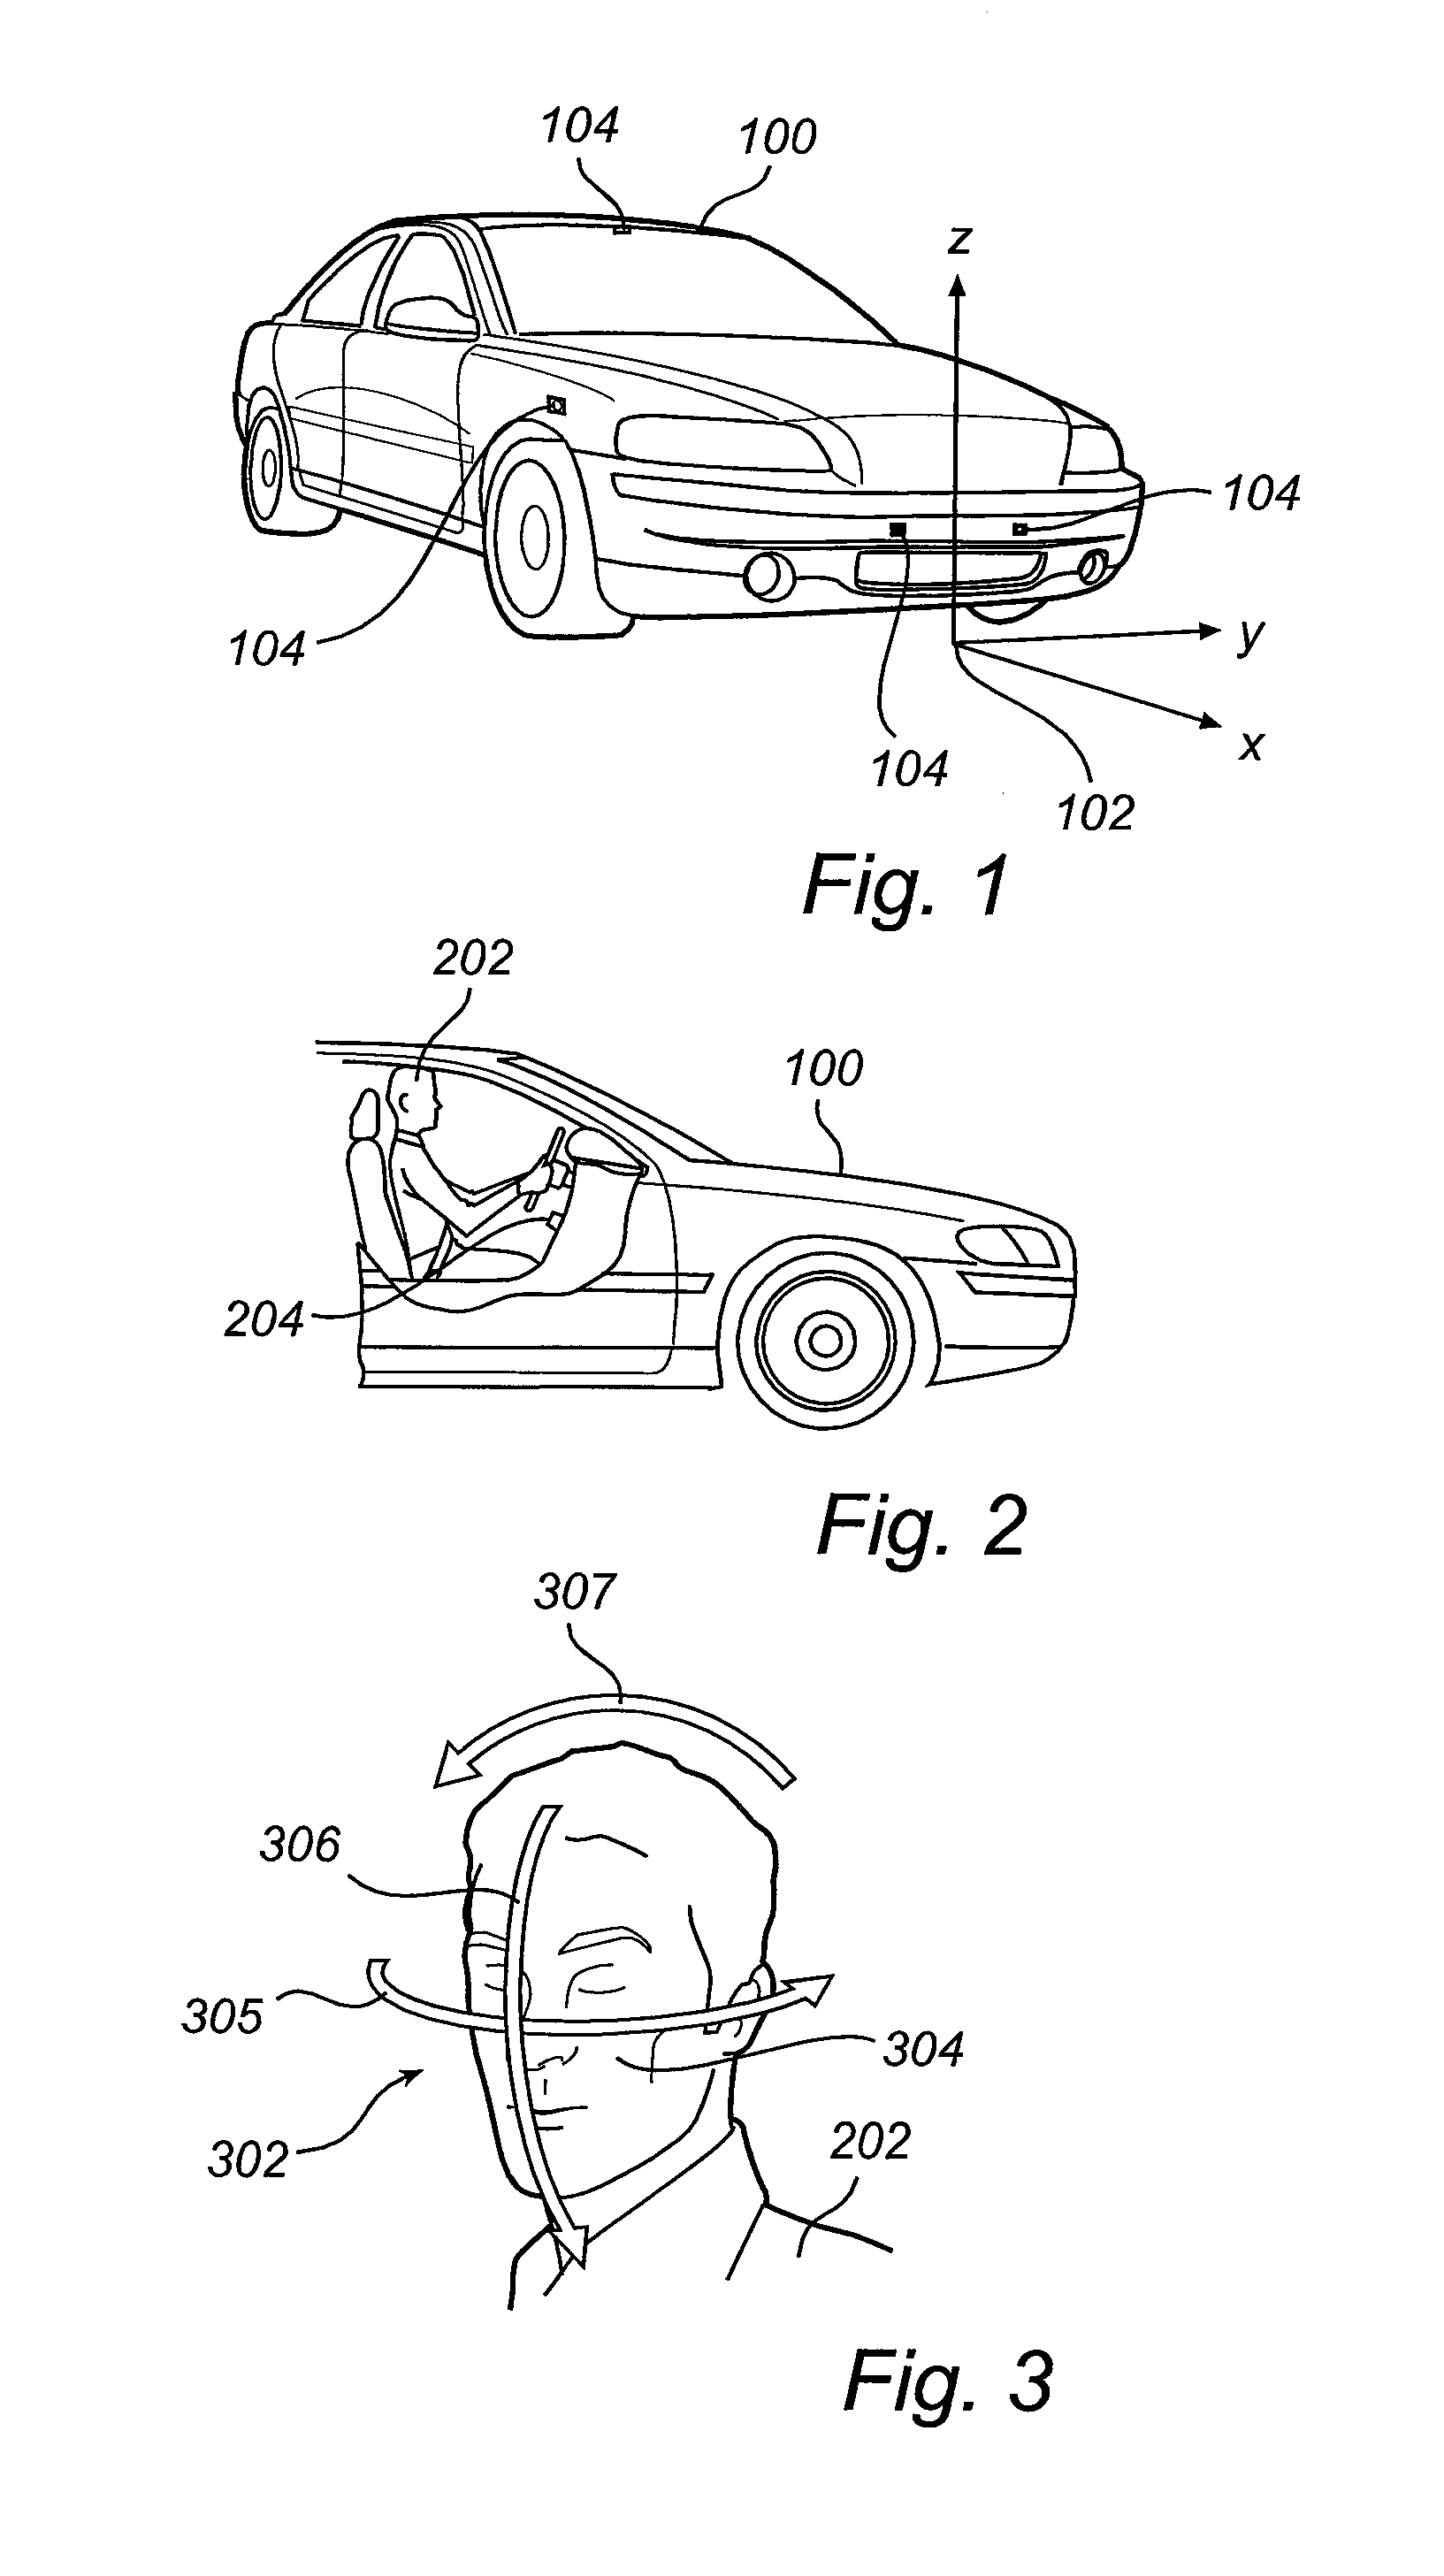 Method for providing a context based coaching message to a driver of a vehicle